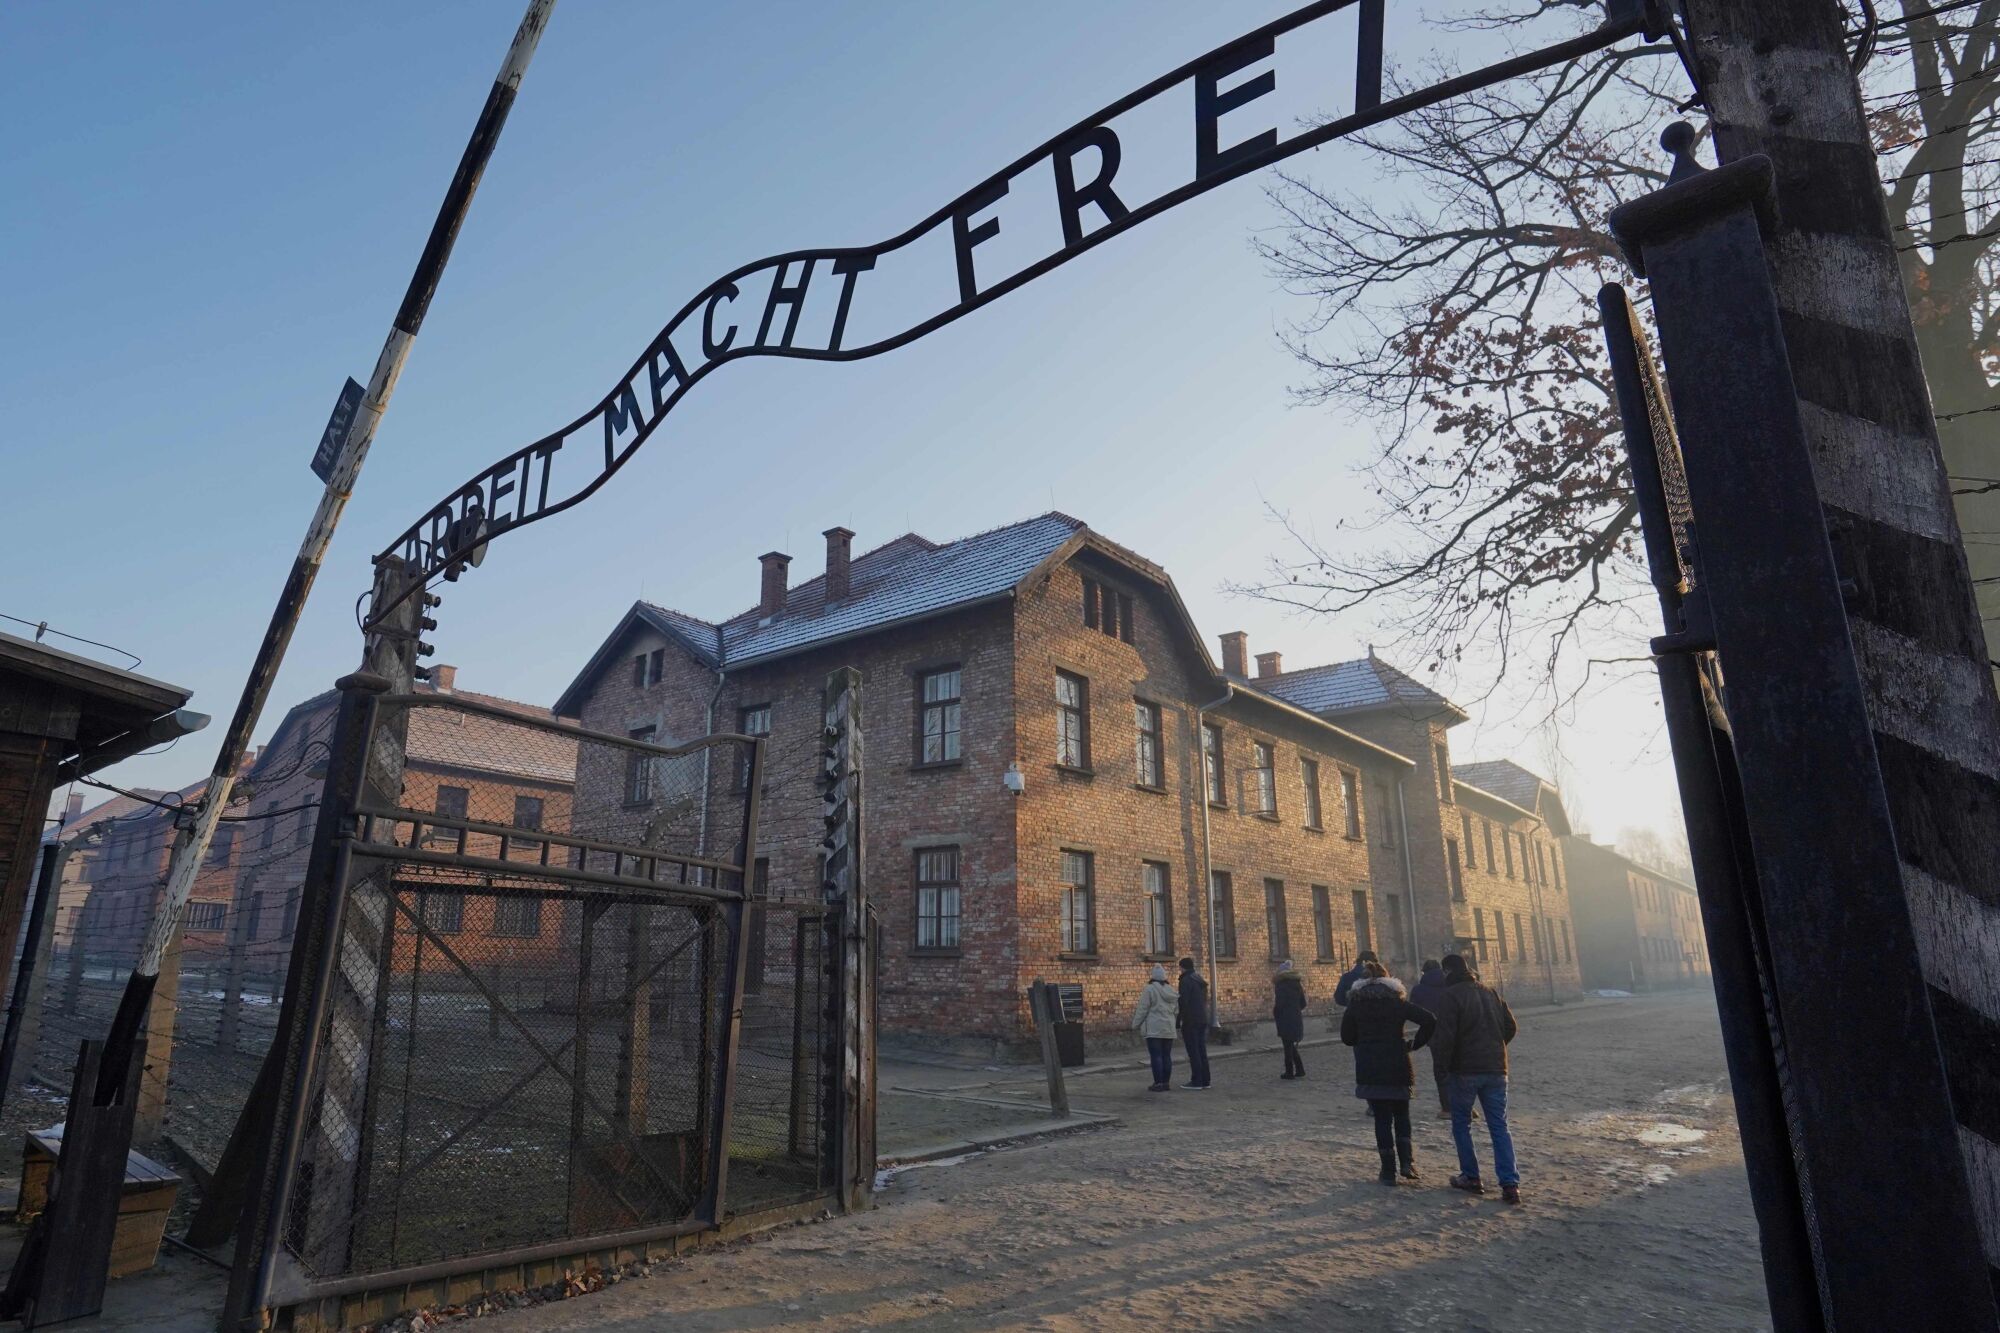 The main gate with the inscription of "Arbeit macht frei" ("Work sets you free") at the entrance to Auschwitz.